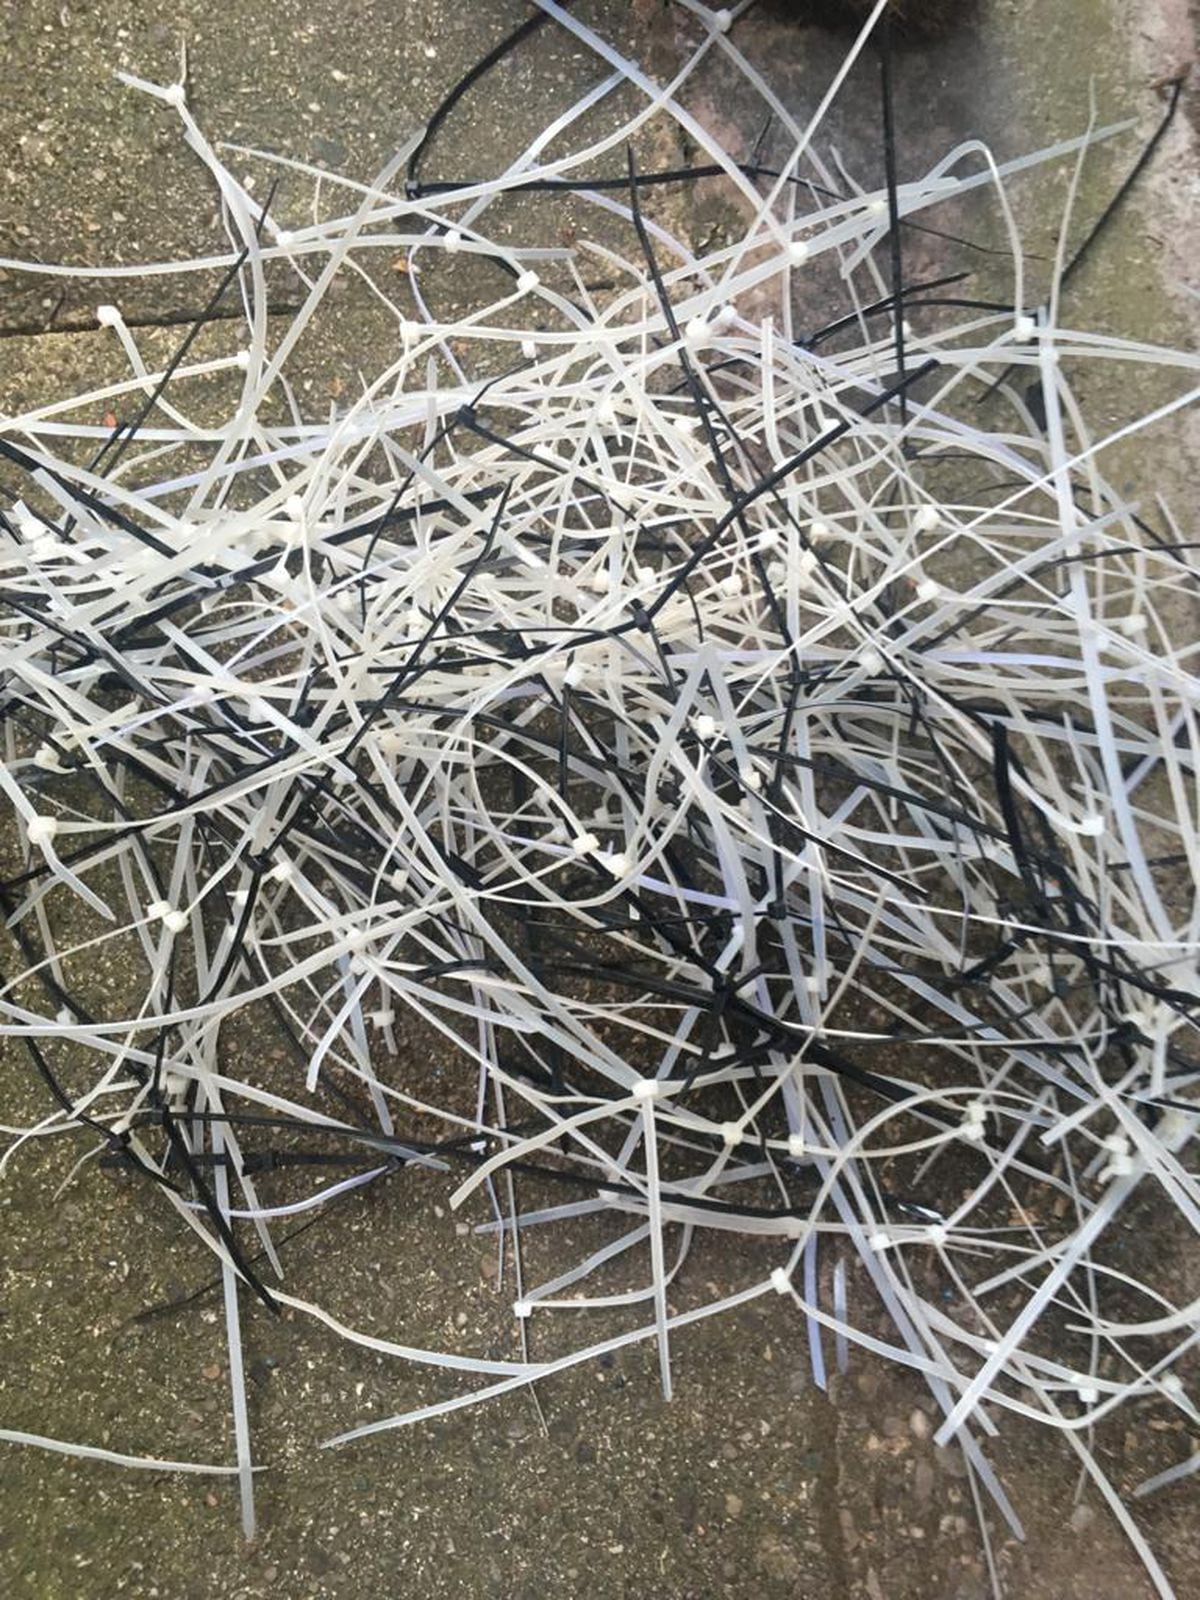 The cable ties which are allegedly use. Photo: Les Trumpeter